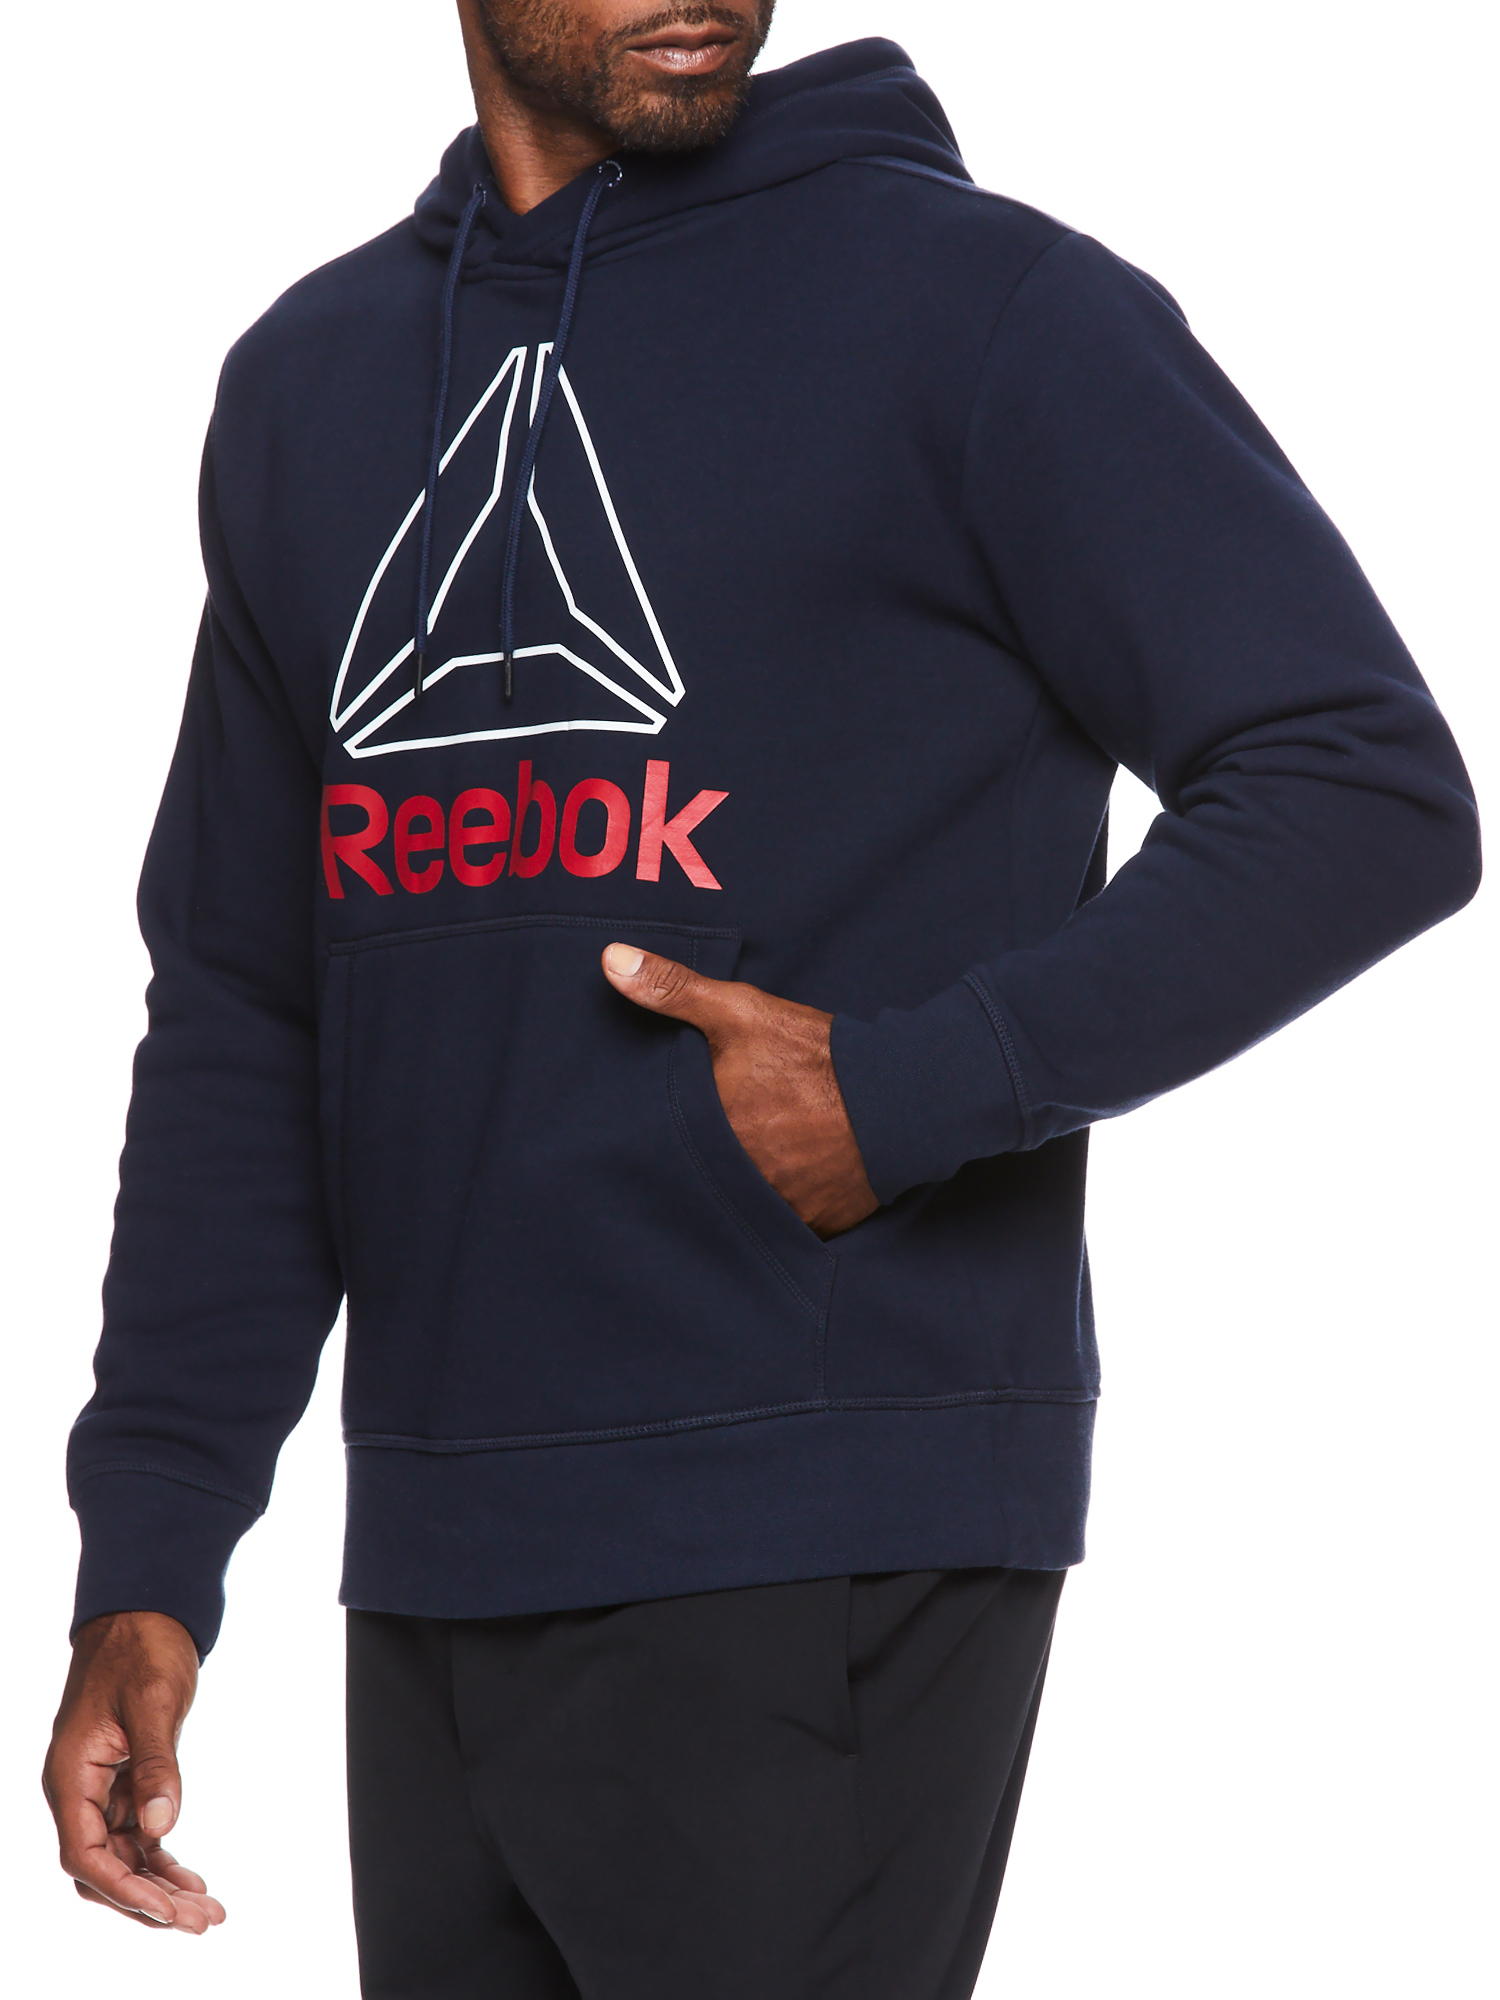 Reebok Mens and Big Mens Active Pullover Fleece Hoodie, Up to 3XL - image 3 of 5